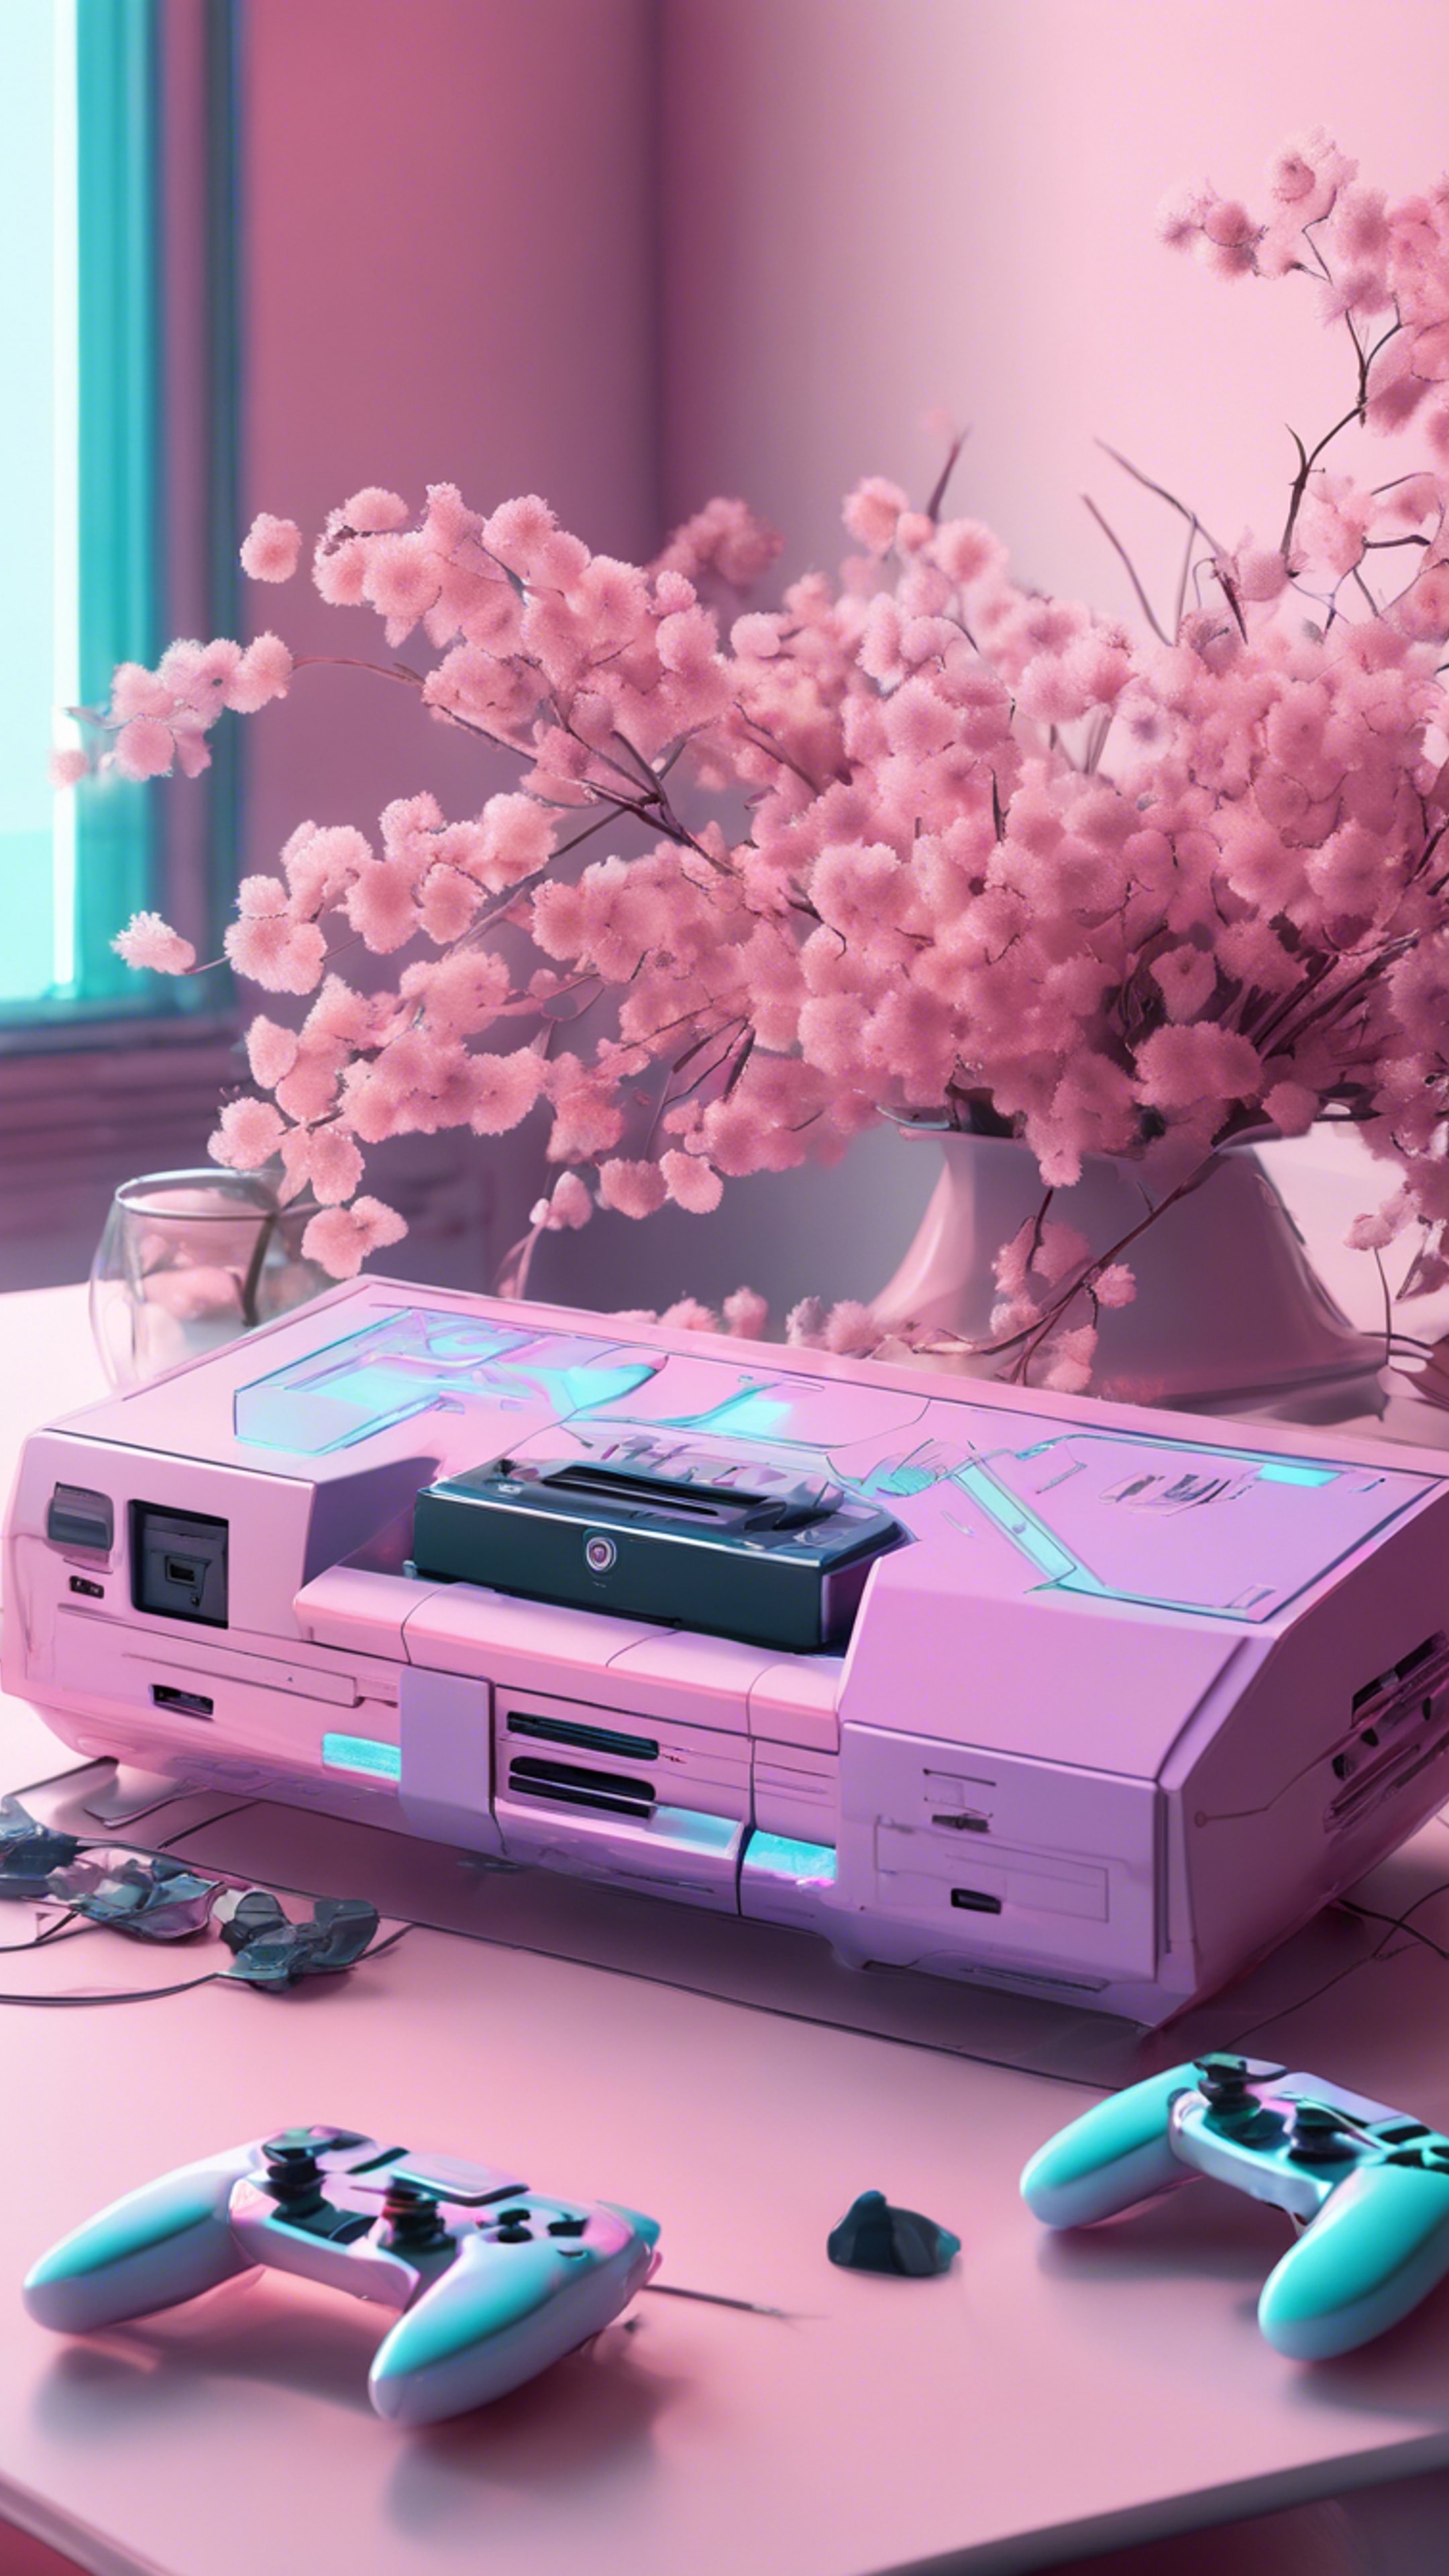 A pastel colored gaming console on a white table next to soft colored flowers in a daylight room. Sfondo[43bf14bcce304acdbb24]